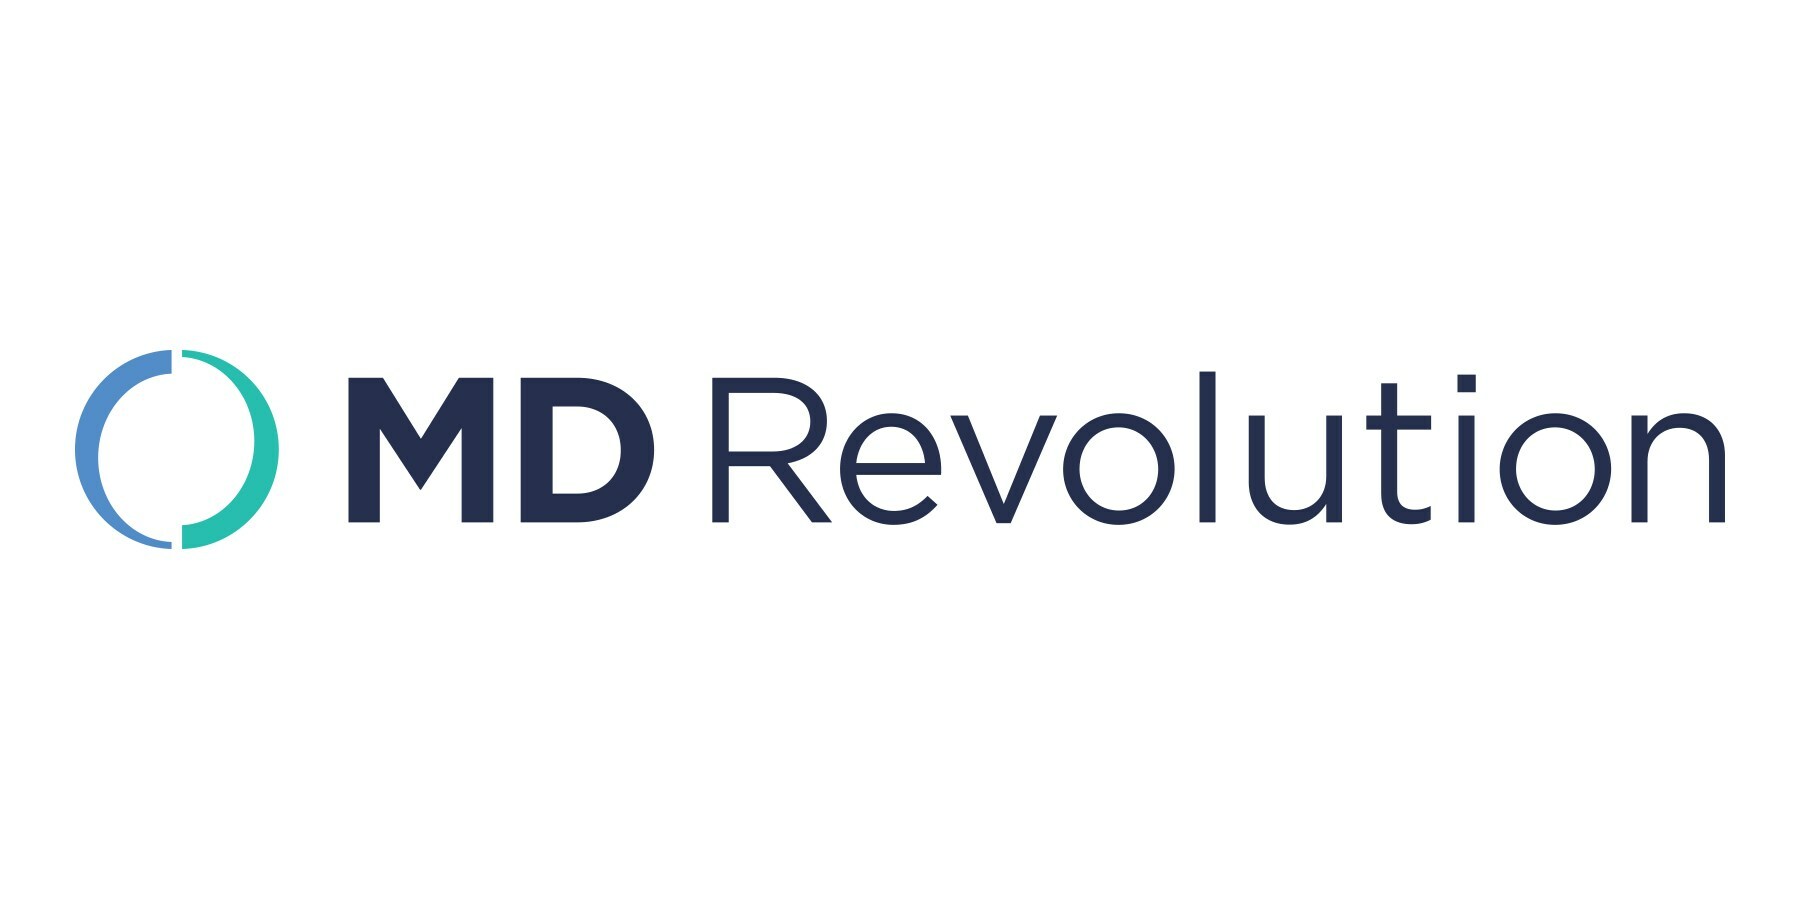 MD Revolution delivers purpose-built remote care management programs for Chronic Care Management, Remote Patient Monitoring, and more, powered by a best-in-class care management platform to proactively plan ongoing care, engage patients through connected devices and applications, and provide compliance and billing operations. (PRNewsfoto/MD Revolution)